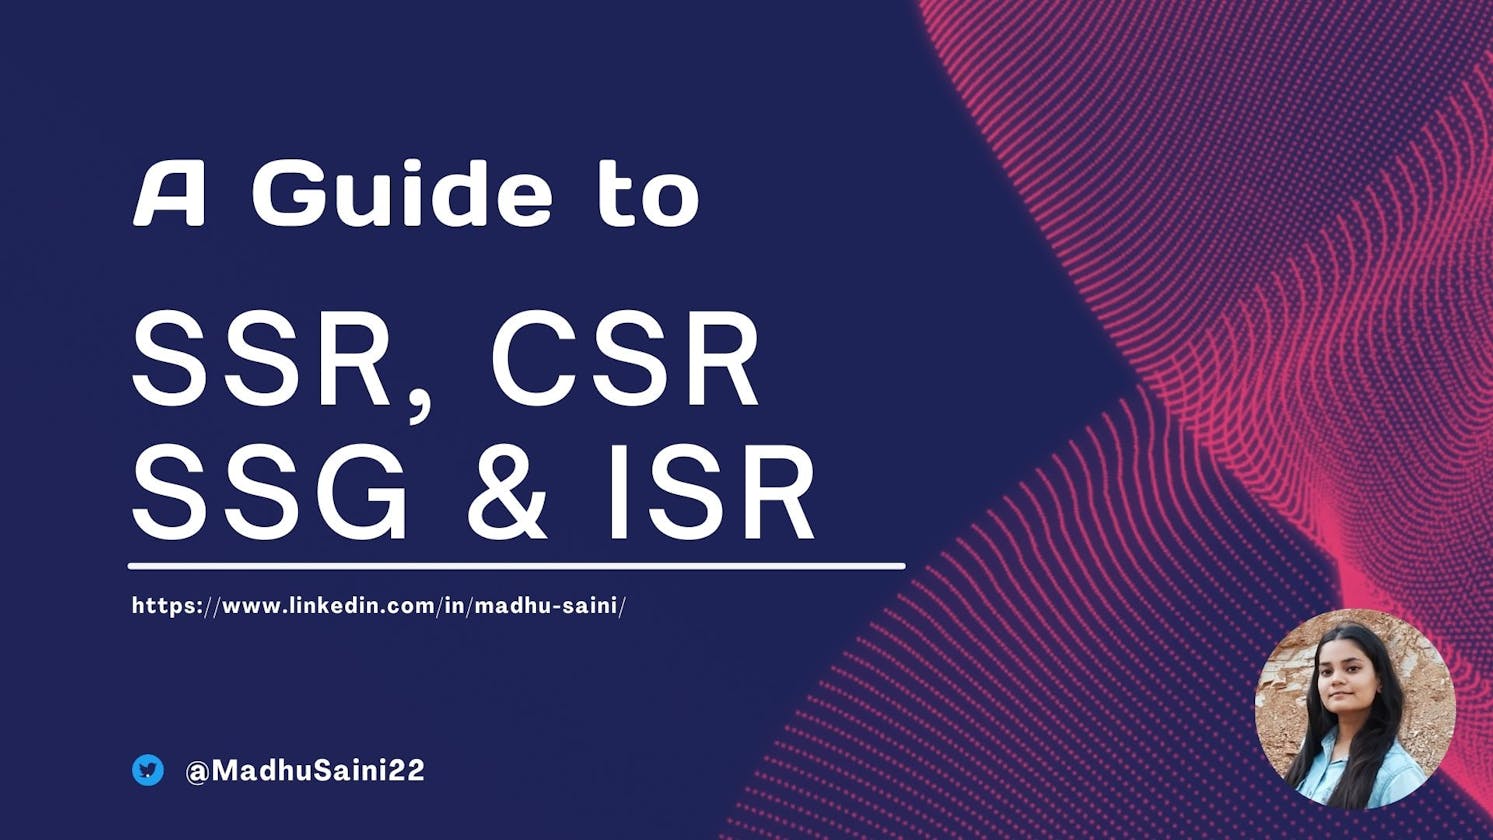 A Guide to SSR, CSR, SSG and ISR